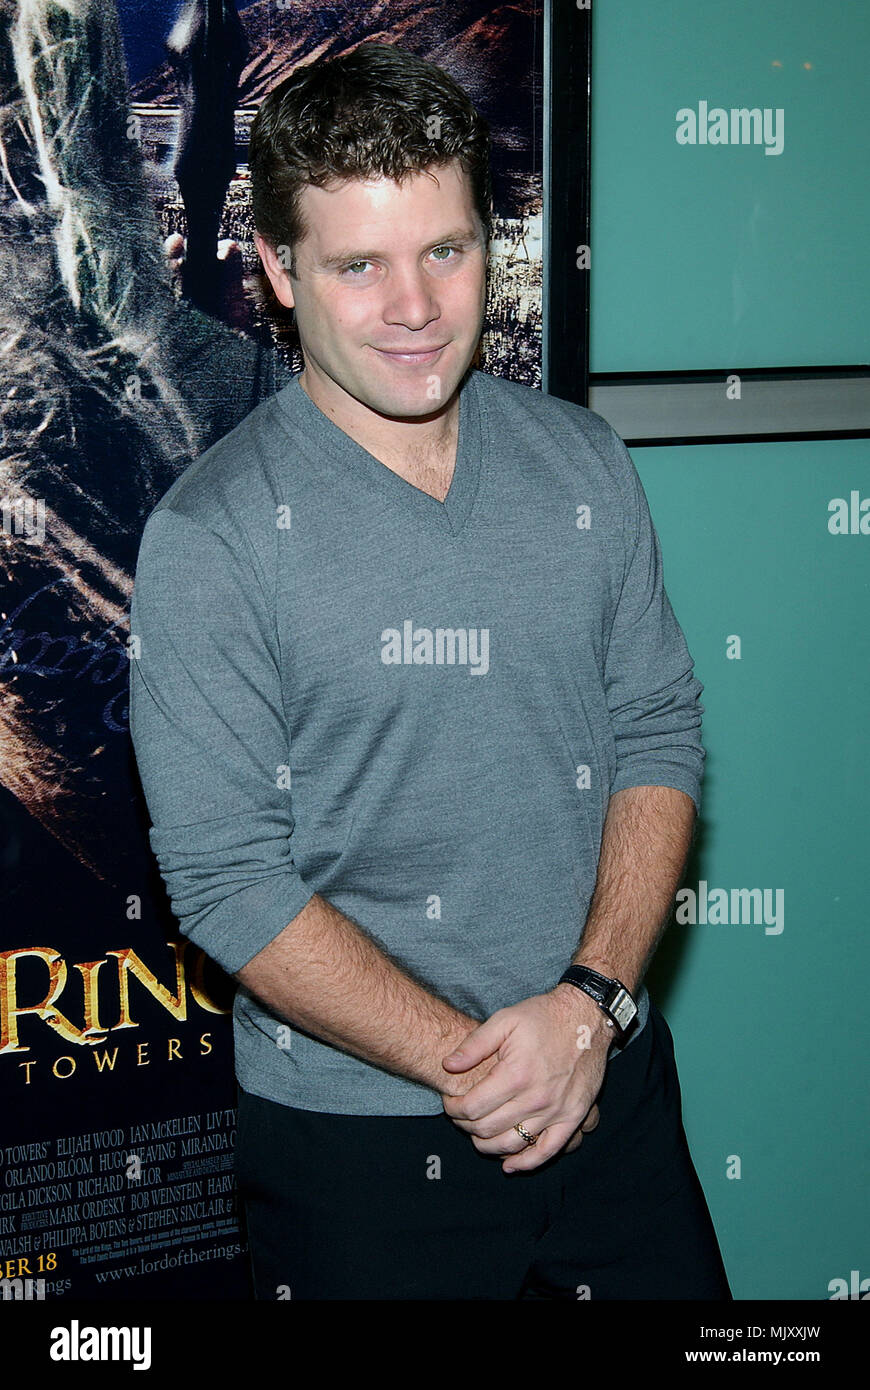 Sean Astin arriving at The premiere of 'The Lord Of The Rings: The Two Towers' at the Cineramadome Theatre in Los Angeles. December 15, 2002.           -            AstinSean33.jpgAstinSean33  Event in Hollywood Life - California,  Red Carpet Event, Vertical, USA, Film Industry, Celebrities,  Photography, Bestof, Arts Culture and Entertainment, Topix Celebrities fashion /  from the Red Carpet-, one person, Vertical, Best of, Hollywood Life, Event in Hollywood Life - California,  Red Carpet and backstage, USA, Film Industry, Celebrities,  movie celebrities, TV celebrities, Music celebrities, Ph Stock Photo